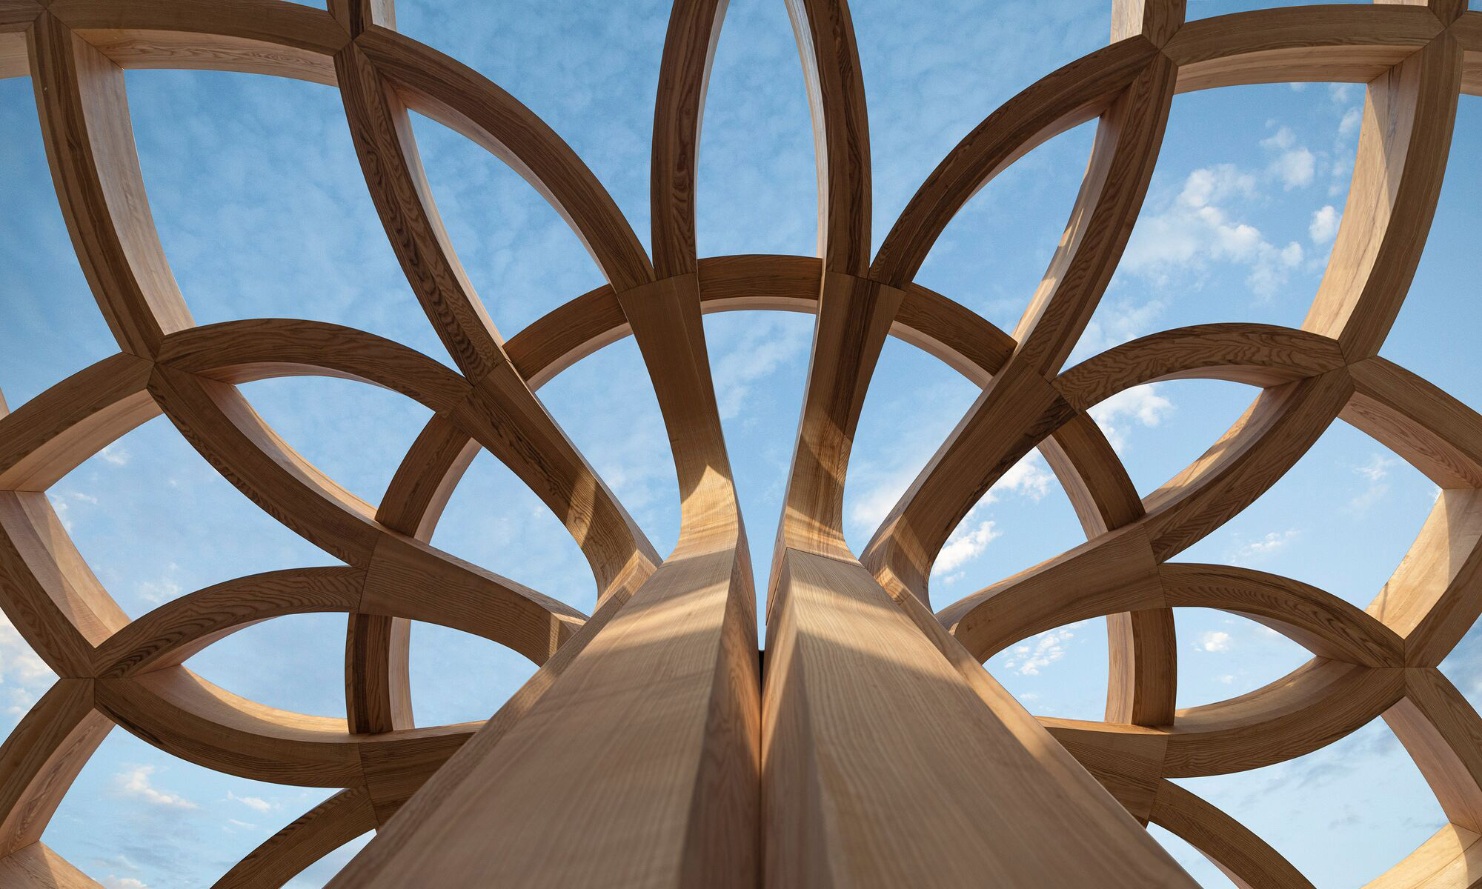 Free Form timber structure in a sunflower design.